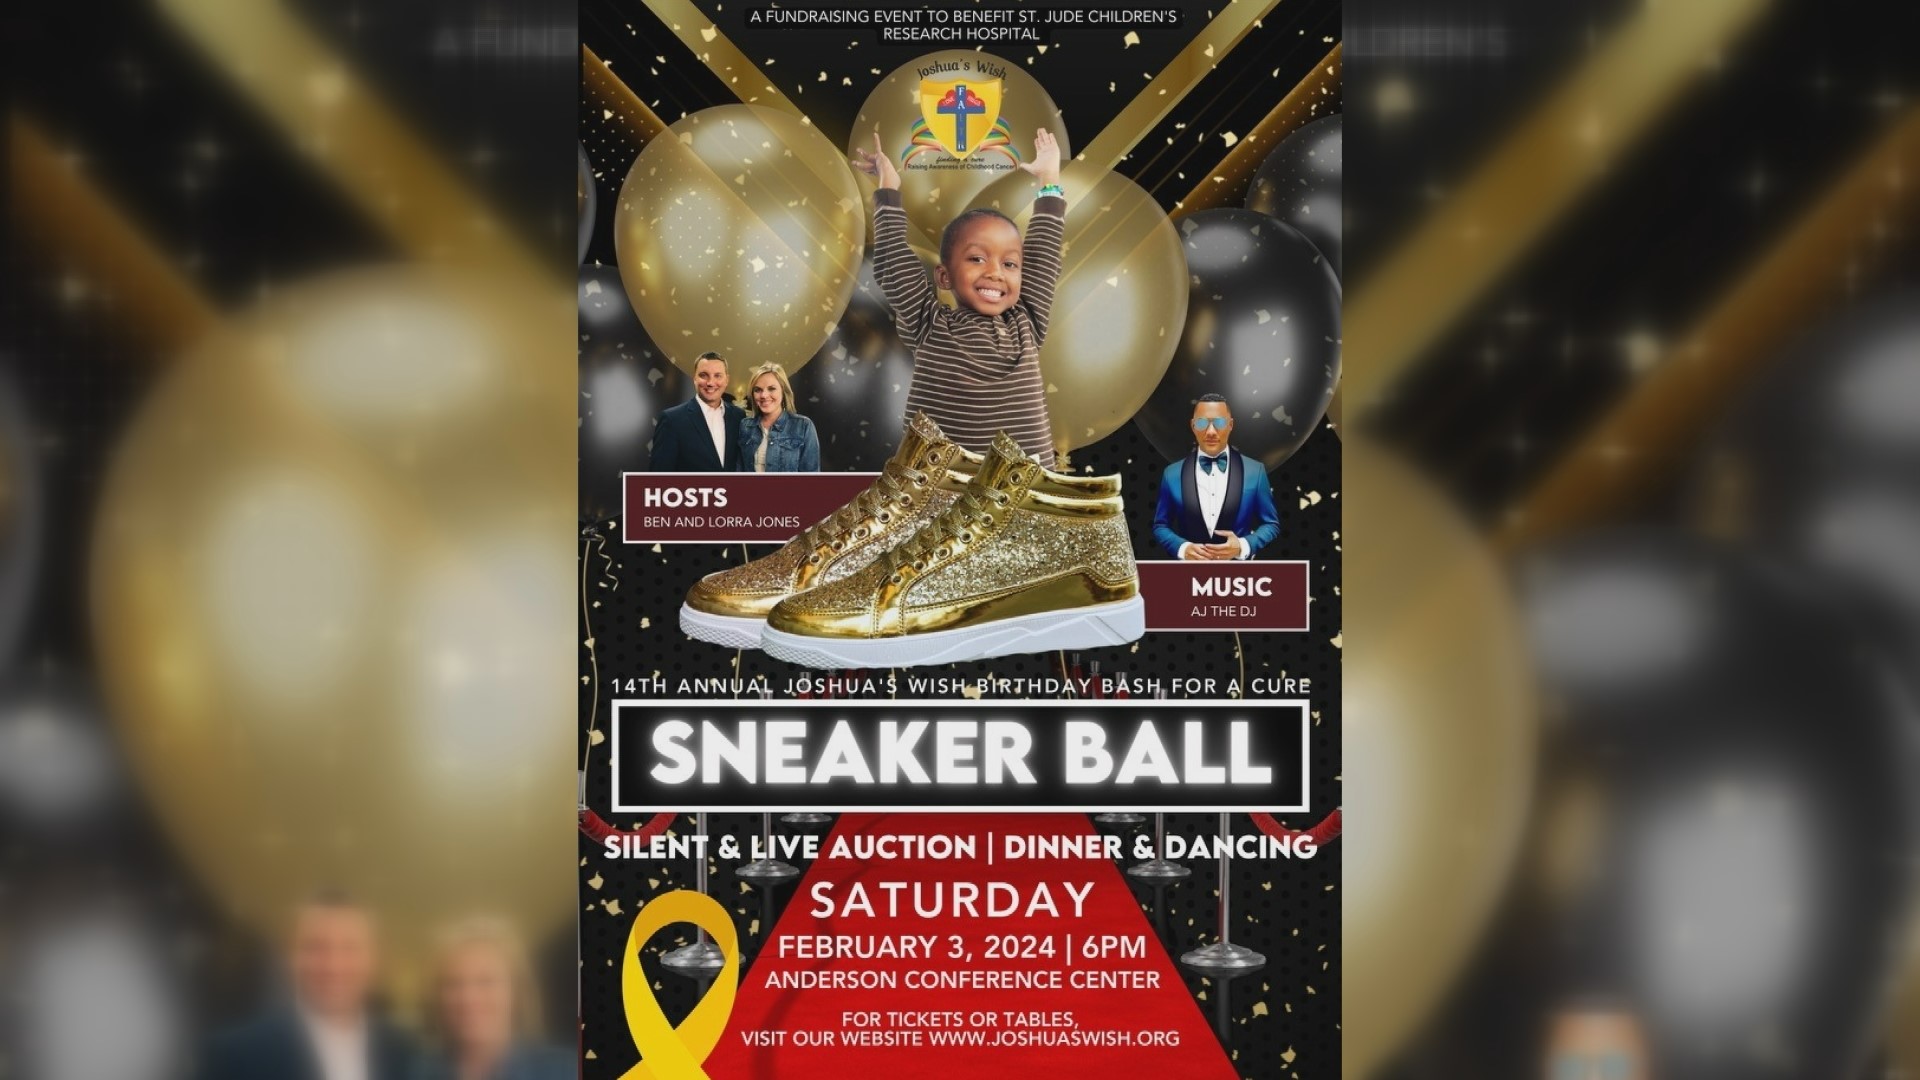 In 2009, Joshua passed away from brain cancer. Now, his parents Trent and Labrina Solomon are organizing an event to raise money and awareness for childhood cancer.